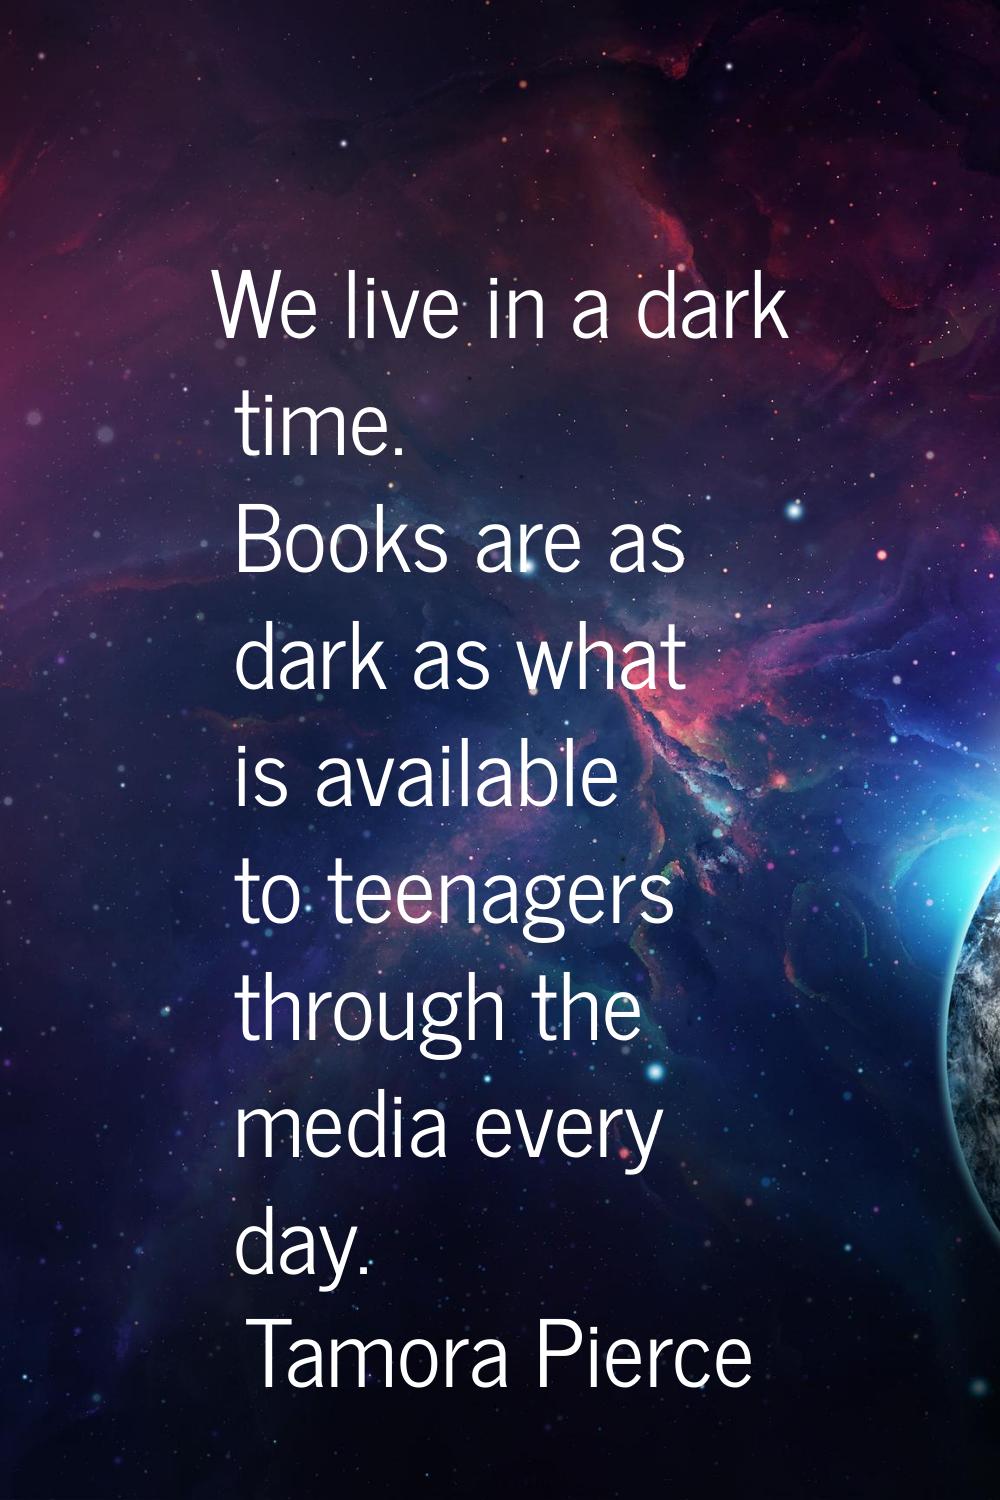 We live in a dark time. Books are as dark as what is available to teenagers through the media every